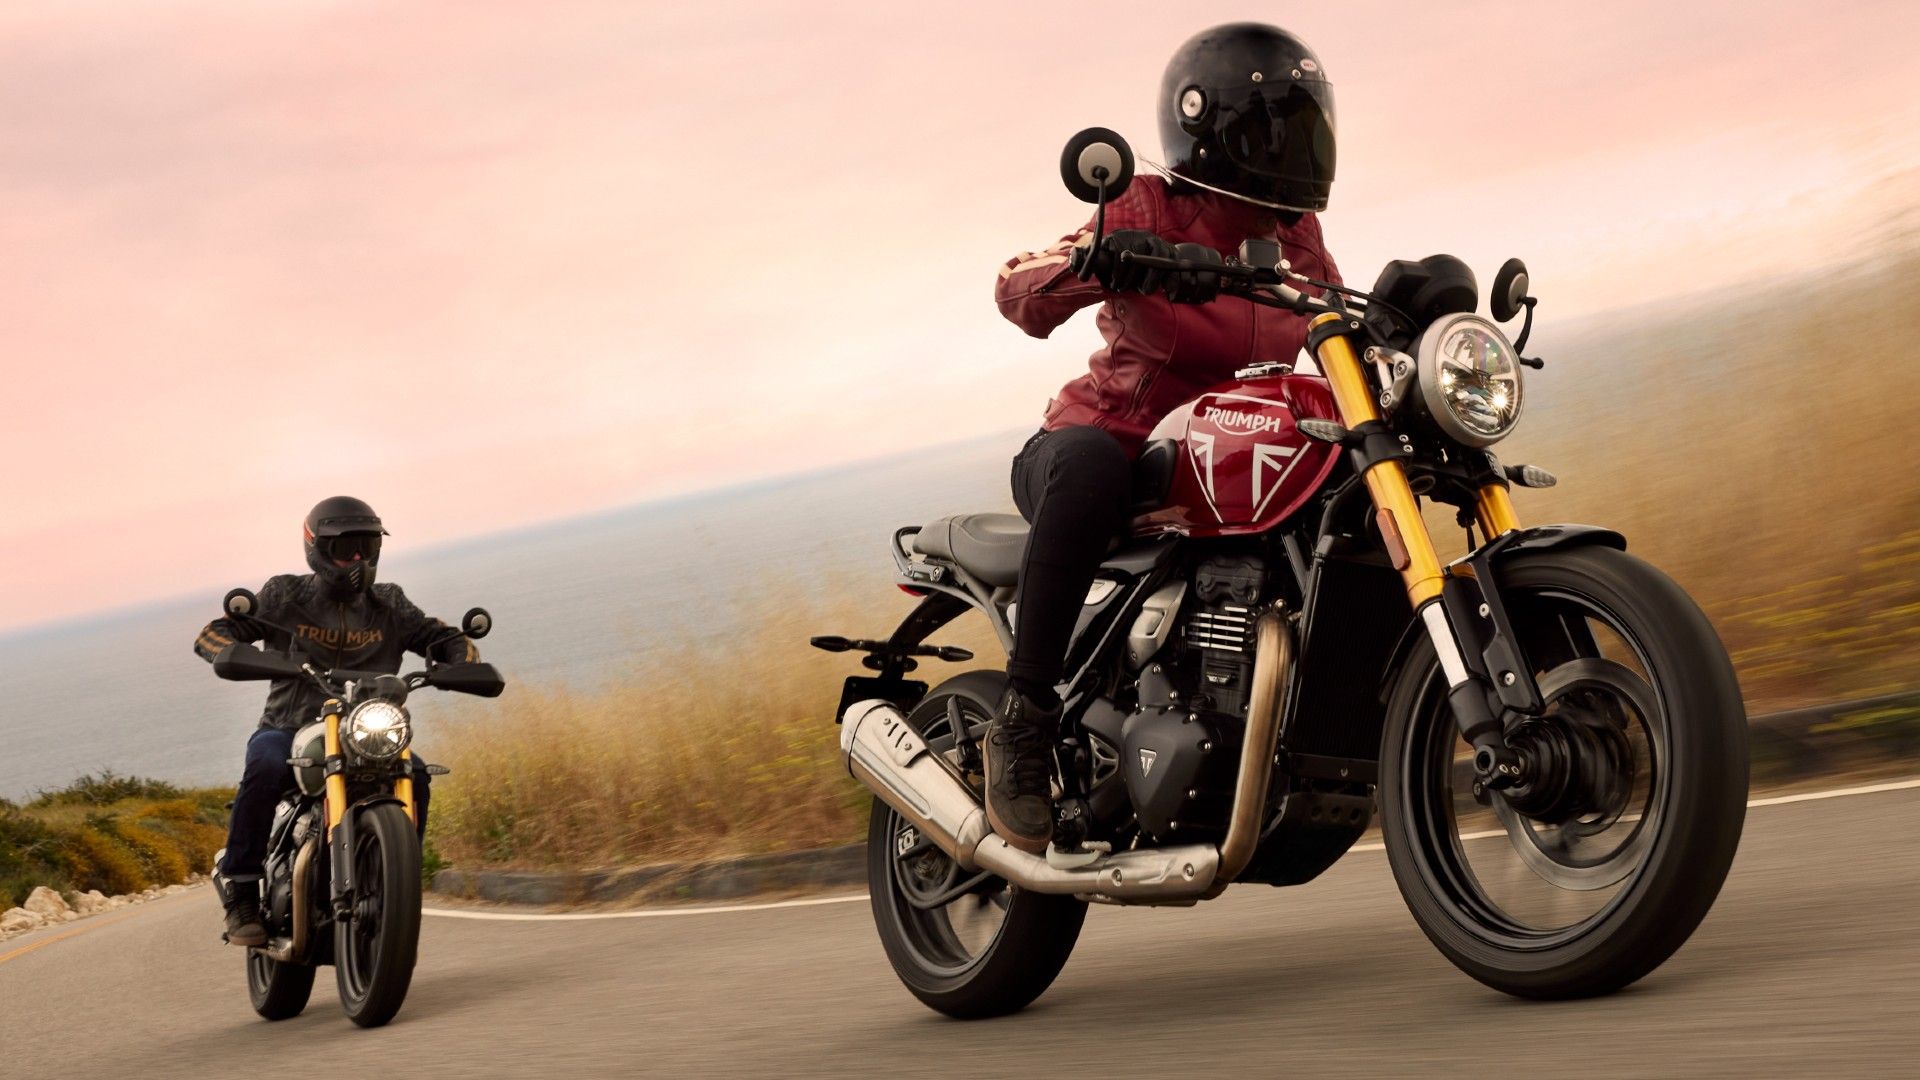 2024 Triumph Speed 400 And Scrambler 400 Are Here To Disrupt The Entry ...